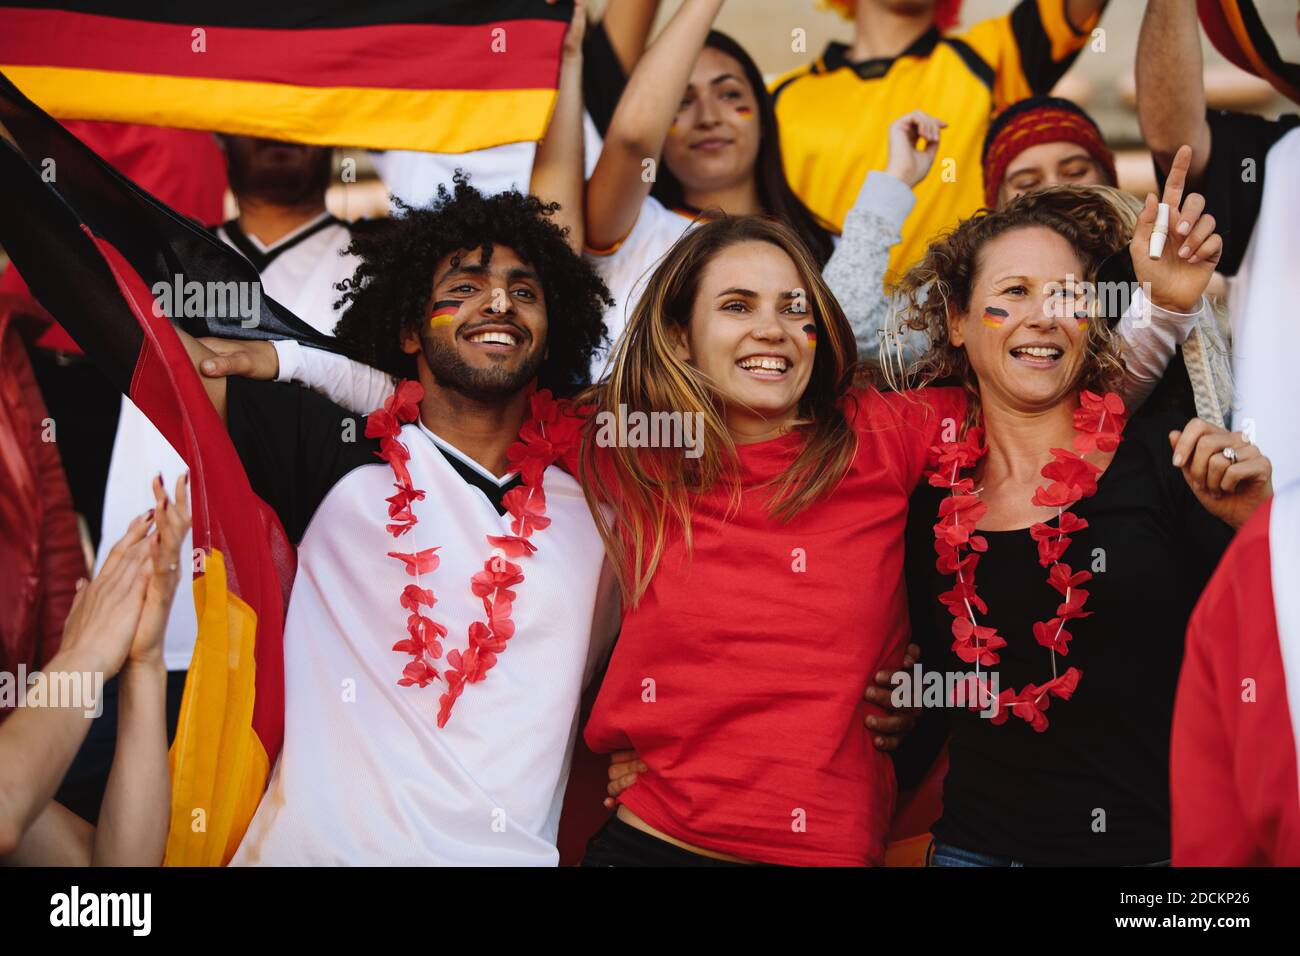 Excited group of a soccer fans from Germany cheering for their team. German football team supporters enjoying during a live match at stadium. Stock Photo